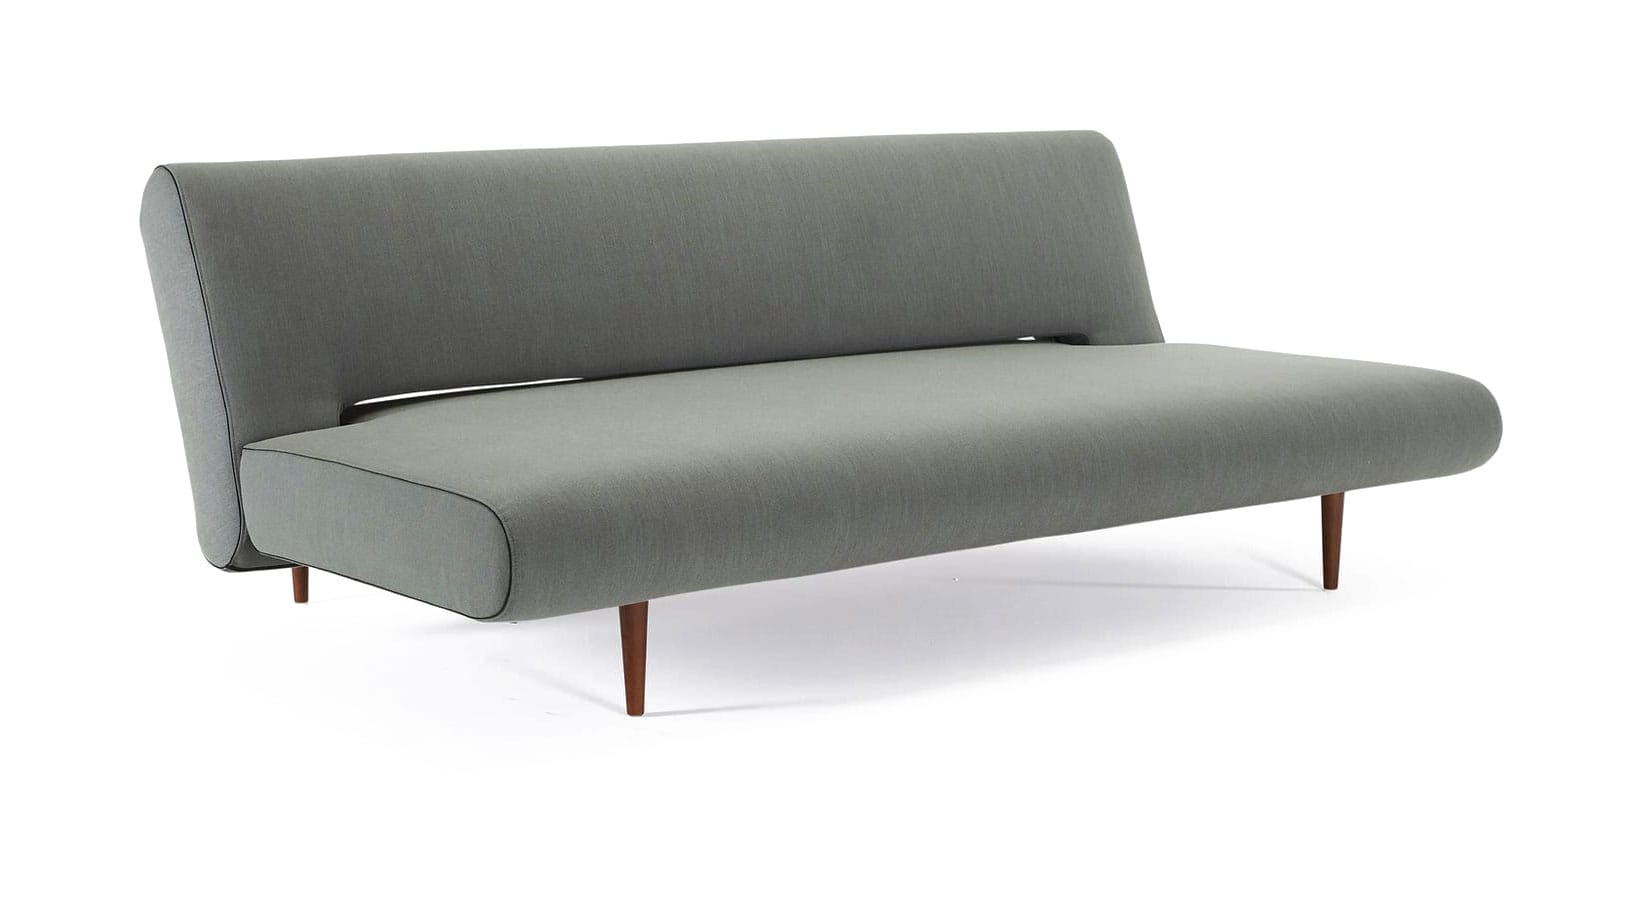 Unfurl Lounger Sofa Bed (Full Size) Elegance Green by Innovation